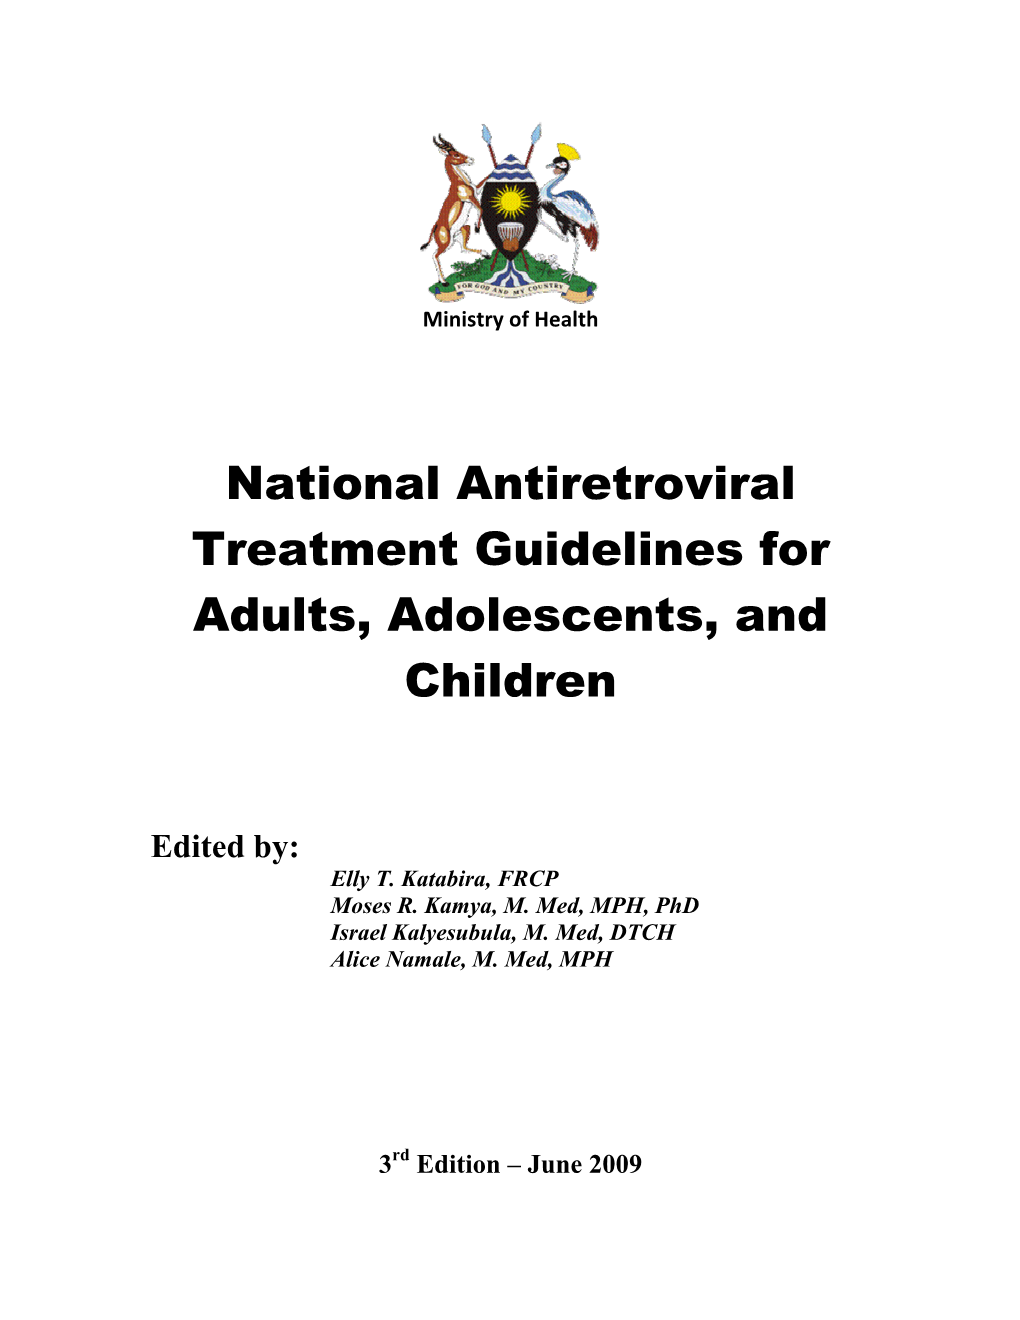 National Antiretroviral Treatment Guidelines for Adults, Adolescents, and Children